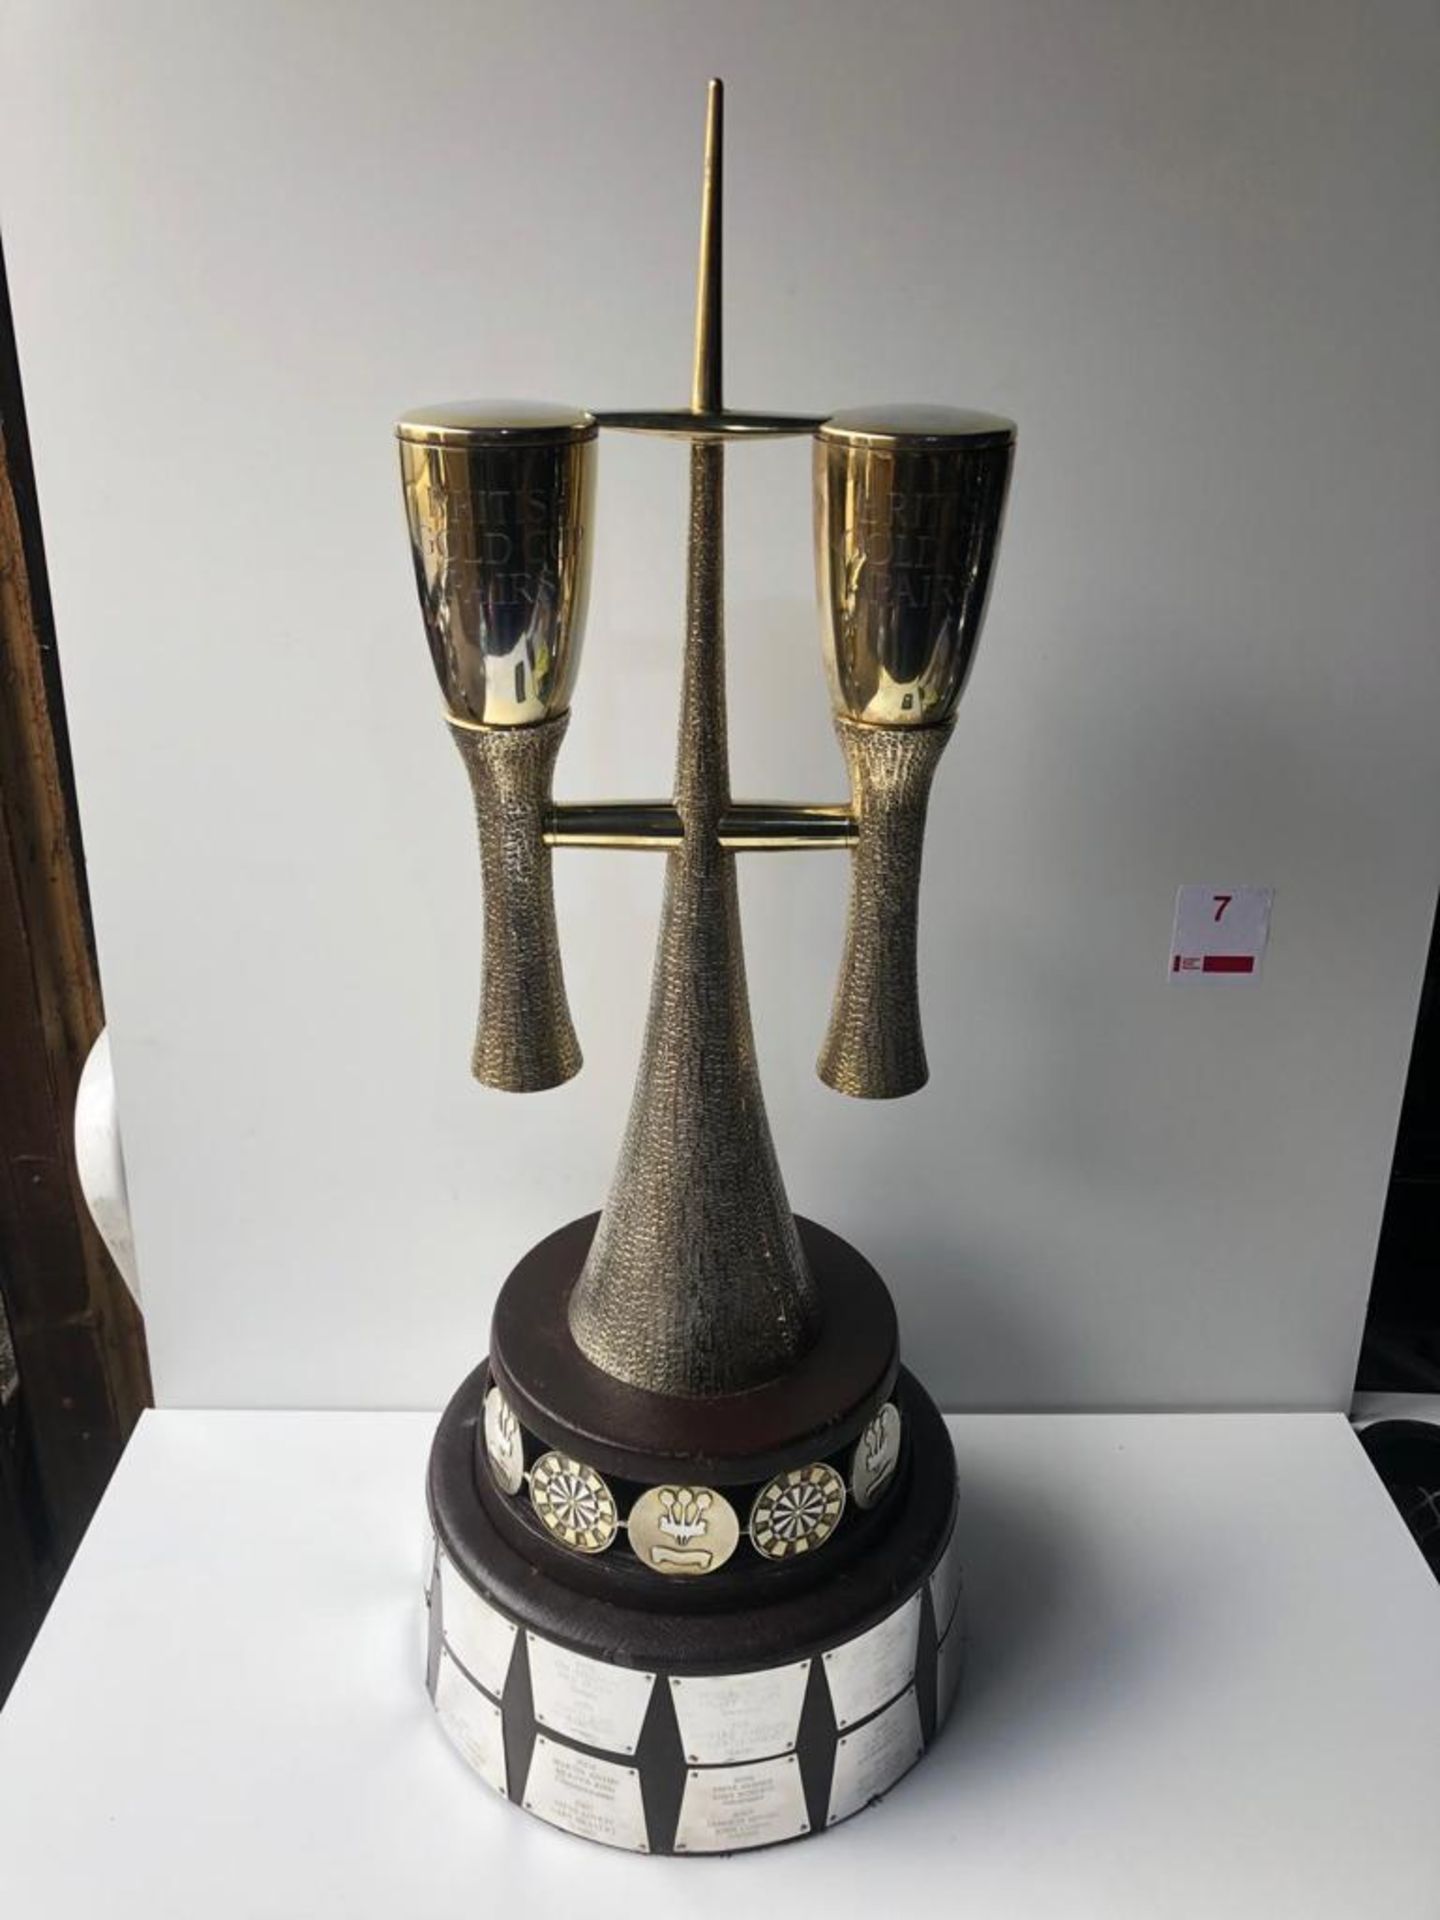 The British Gold Cup Men's Pairs Trophy